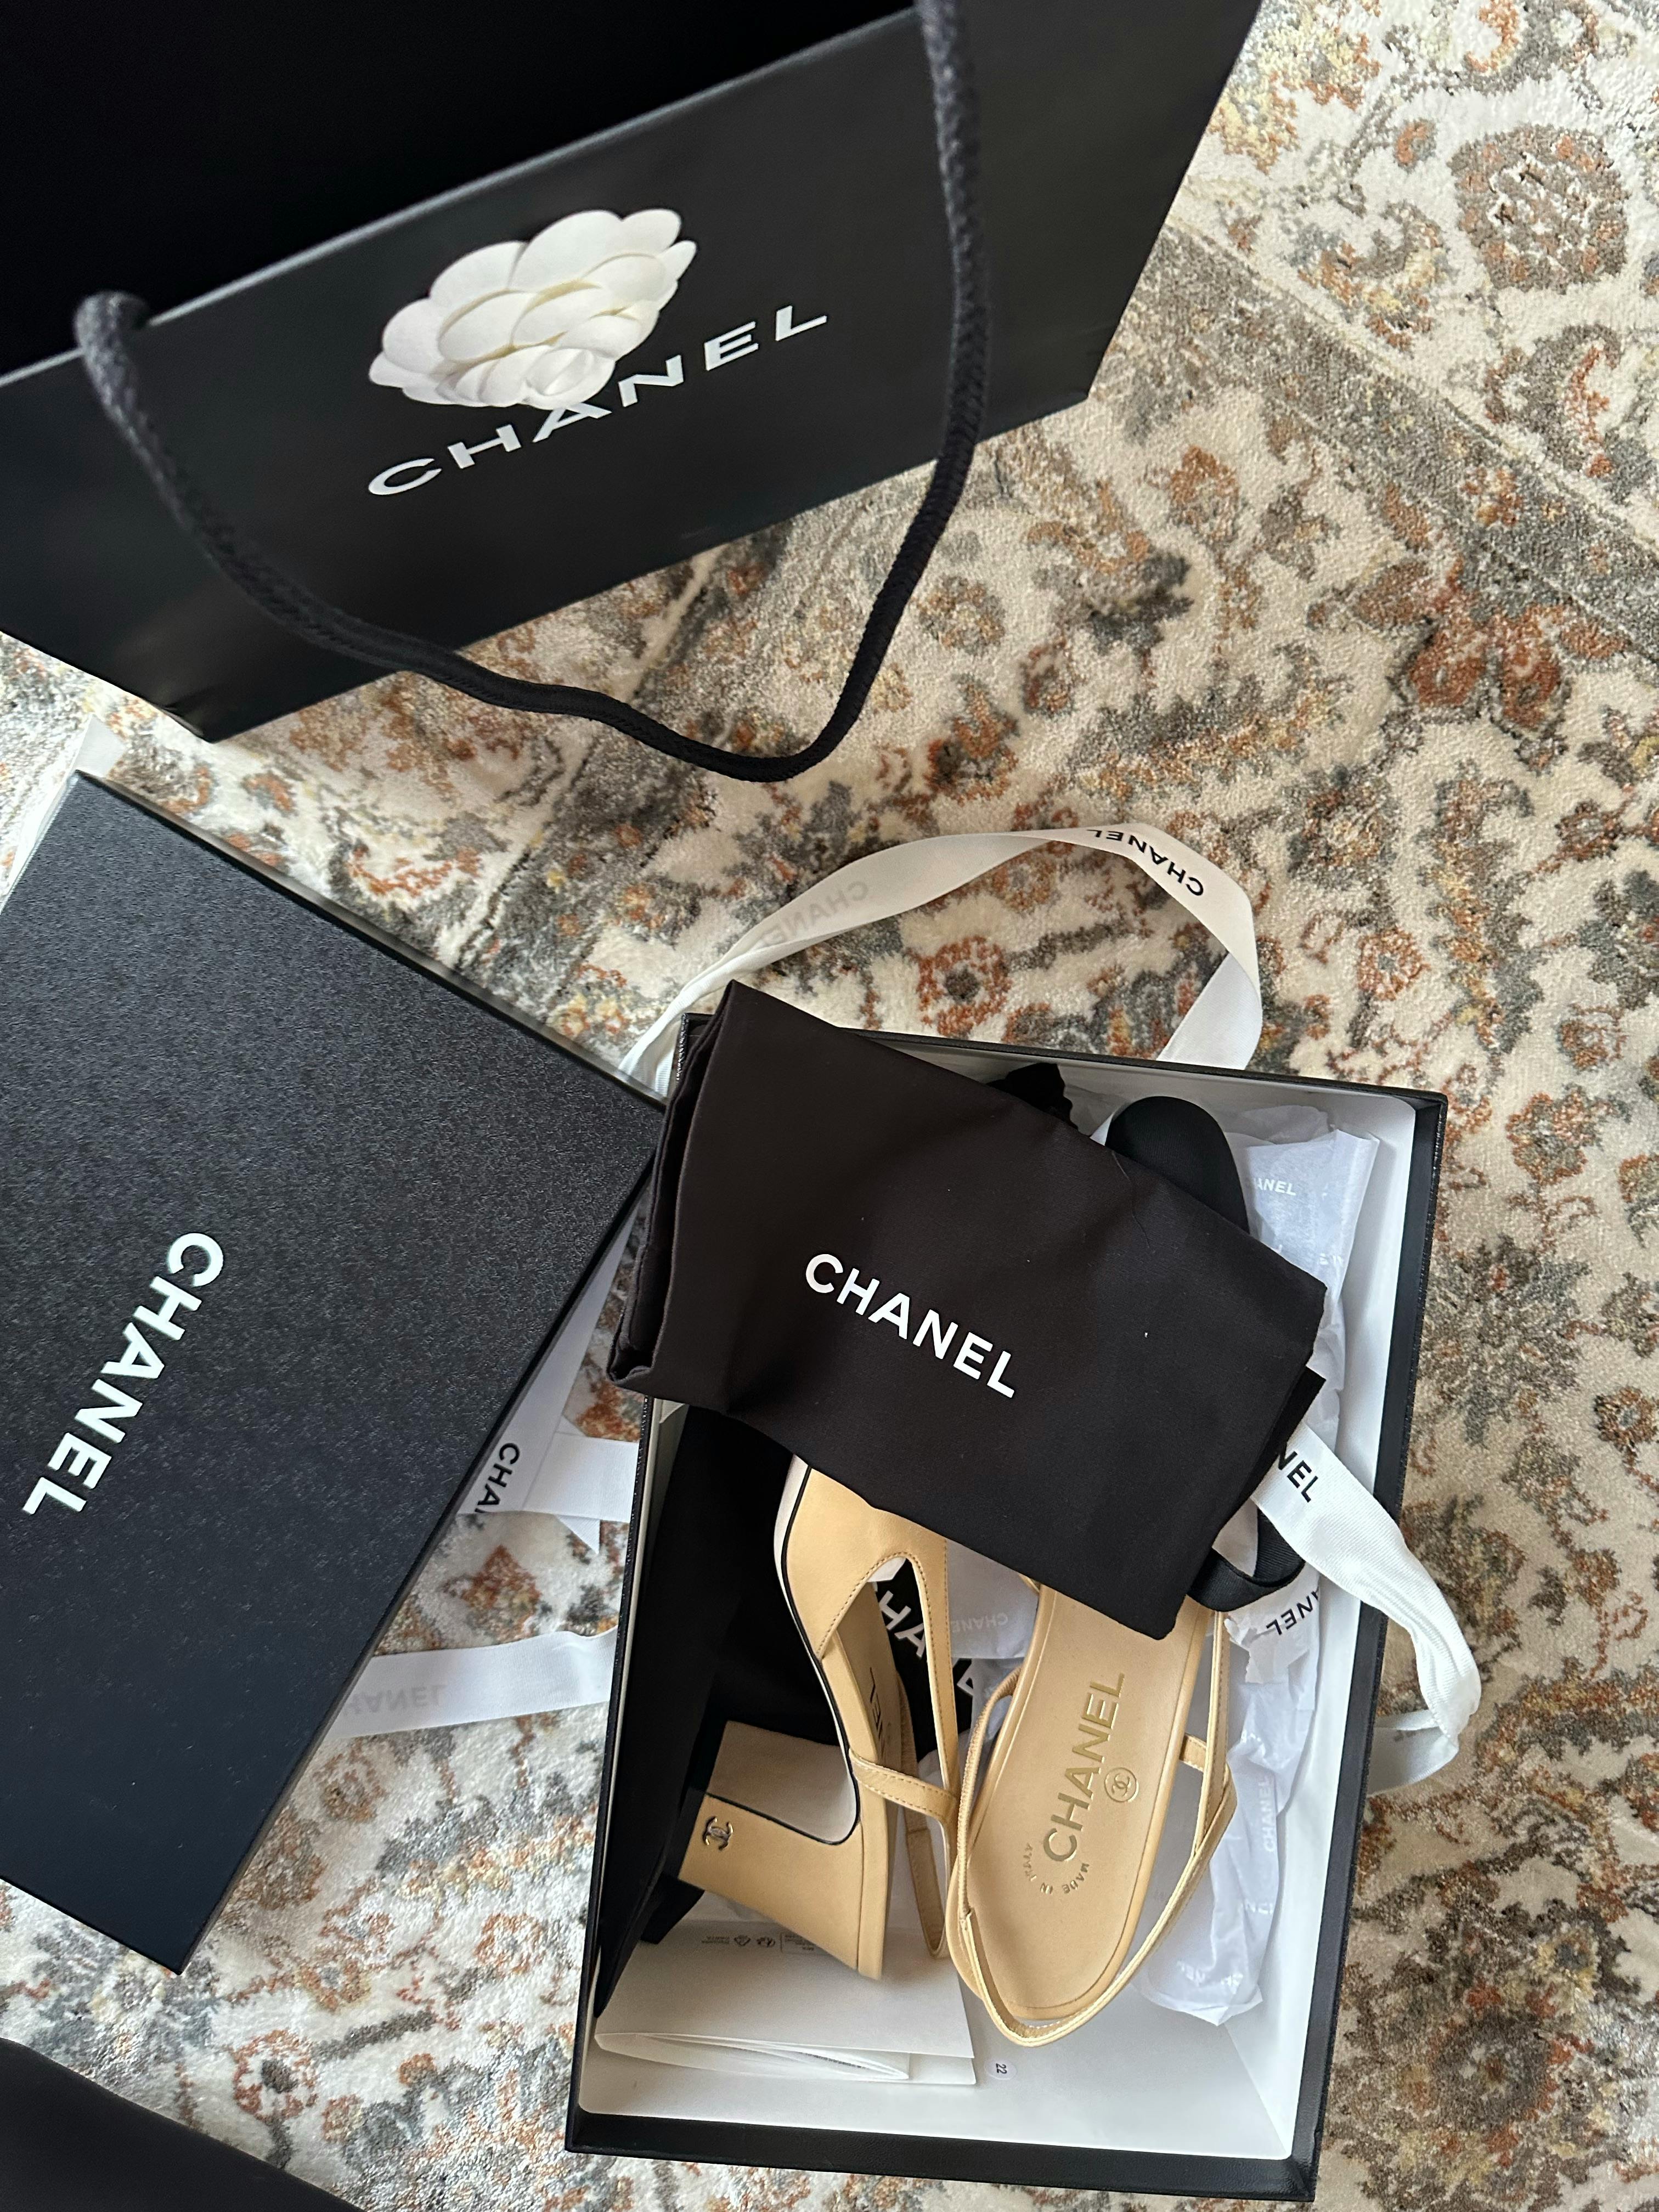 Chanel Photos, Download The BEST Free Chanel Stock Photos & HD Images